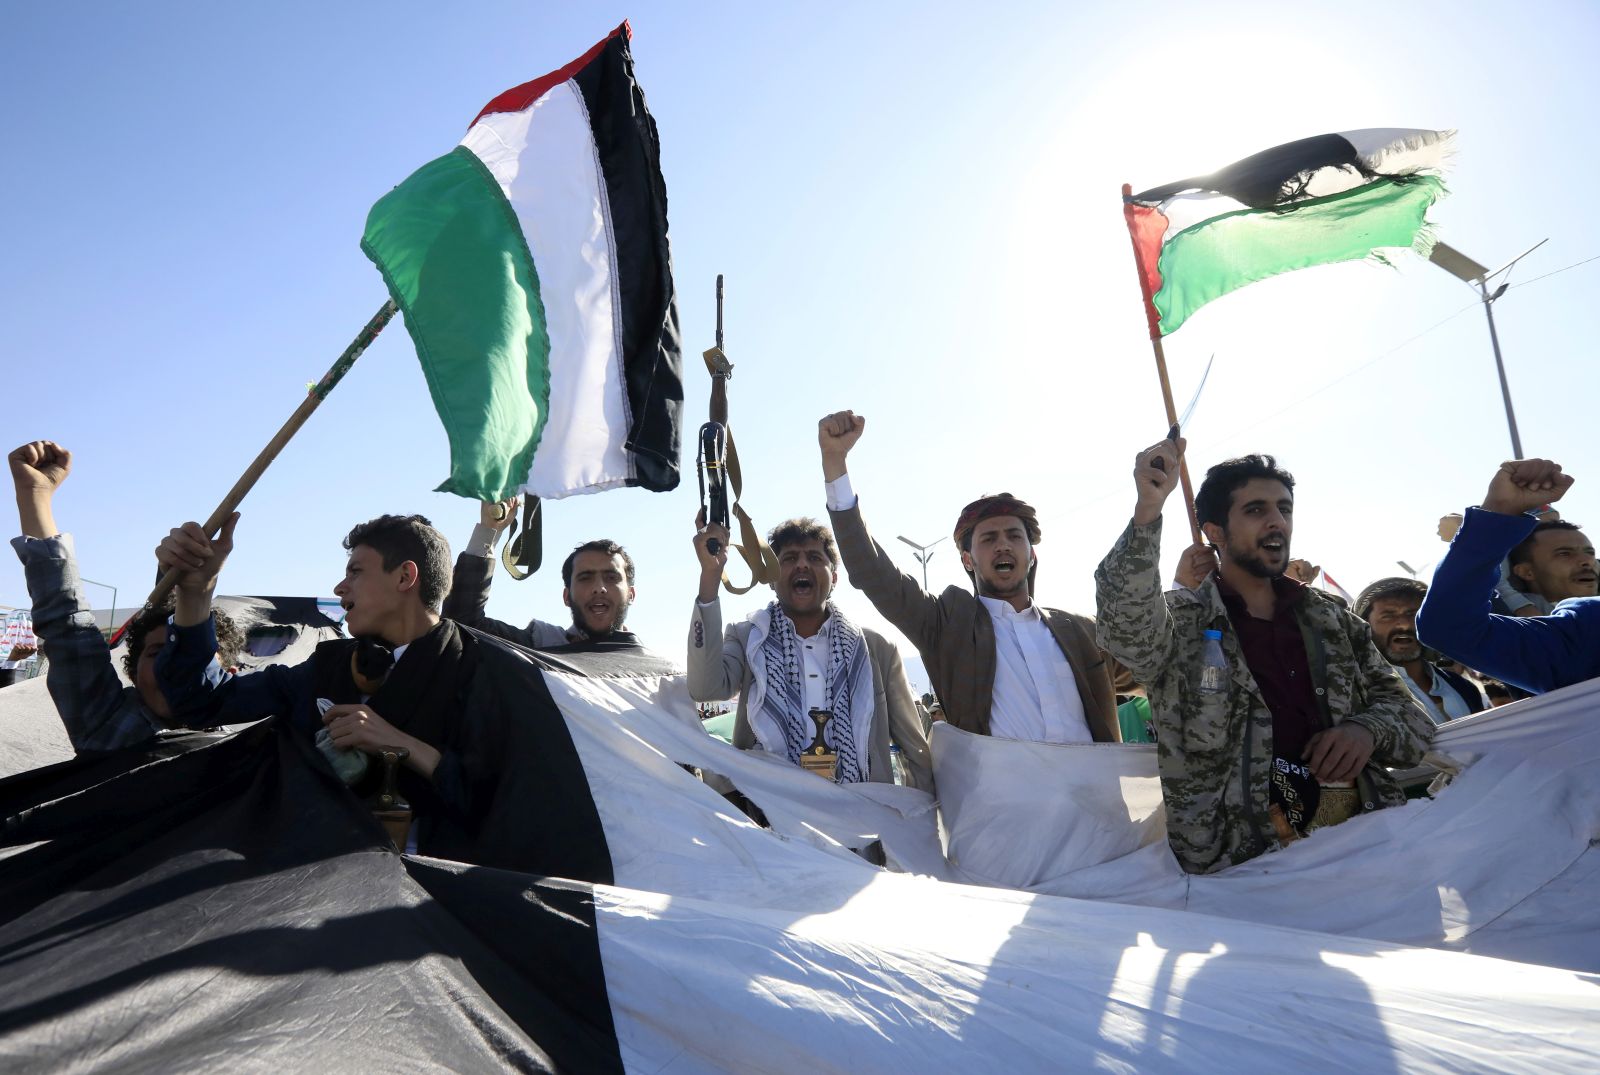 epa11121151 Houthi supporters wave Palestinian flags and shout slogans through gaps in a large-scale Palestinian flag during a protest against US-led strikes on Houthi positions, in Sana'a, Yemen, 02 February 2024. Thousands of Houthis supporters demonstrated in Sana'a to show solidarity with the Palestinian people and protest against US-led strikes on Houthi positions in Yemen. US and British forces have conducted strikes in response to Houthi missile and drone attacks on military and commercial vessels in the Red Sea, the Bab al-Mandab Strait, and the Gulf of Aden since November 2023. In January 2024, the US Department of State designated Yemen's Houthis as a 'Specially Designated Global Terrorist group' due to their increased attacks on shipping lanes. In December 2023, the US Department of Defense announced a multinational operation to safeguard trade and protect ships in the Red Sea in response to the escalation of Houthi attacks.  EPA/YAHYA ARHAB